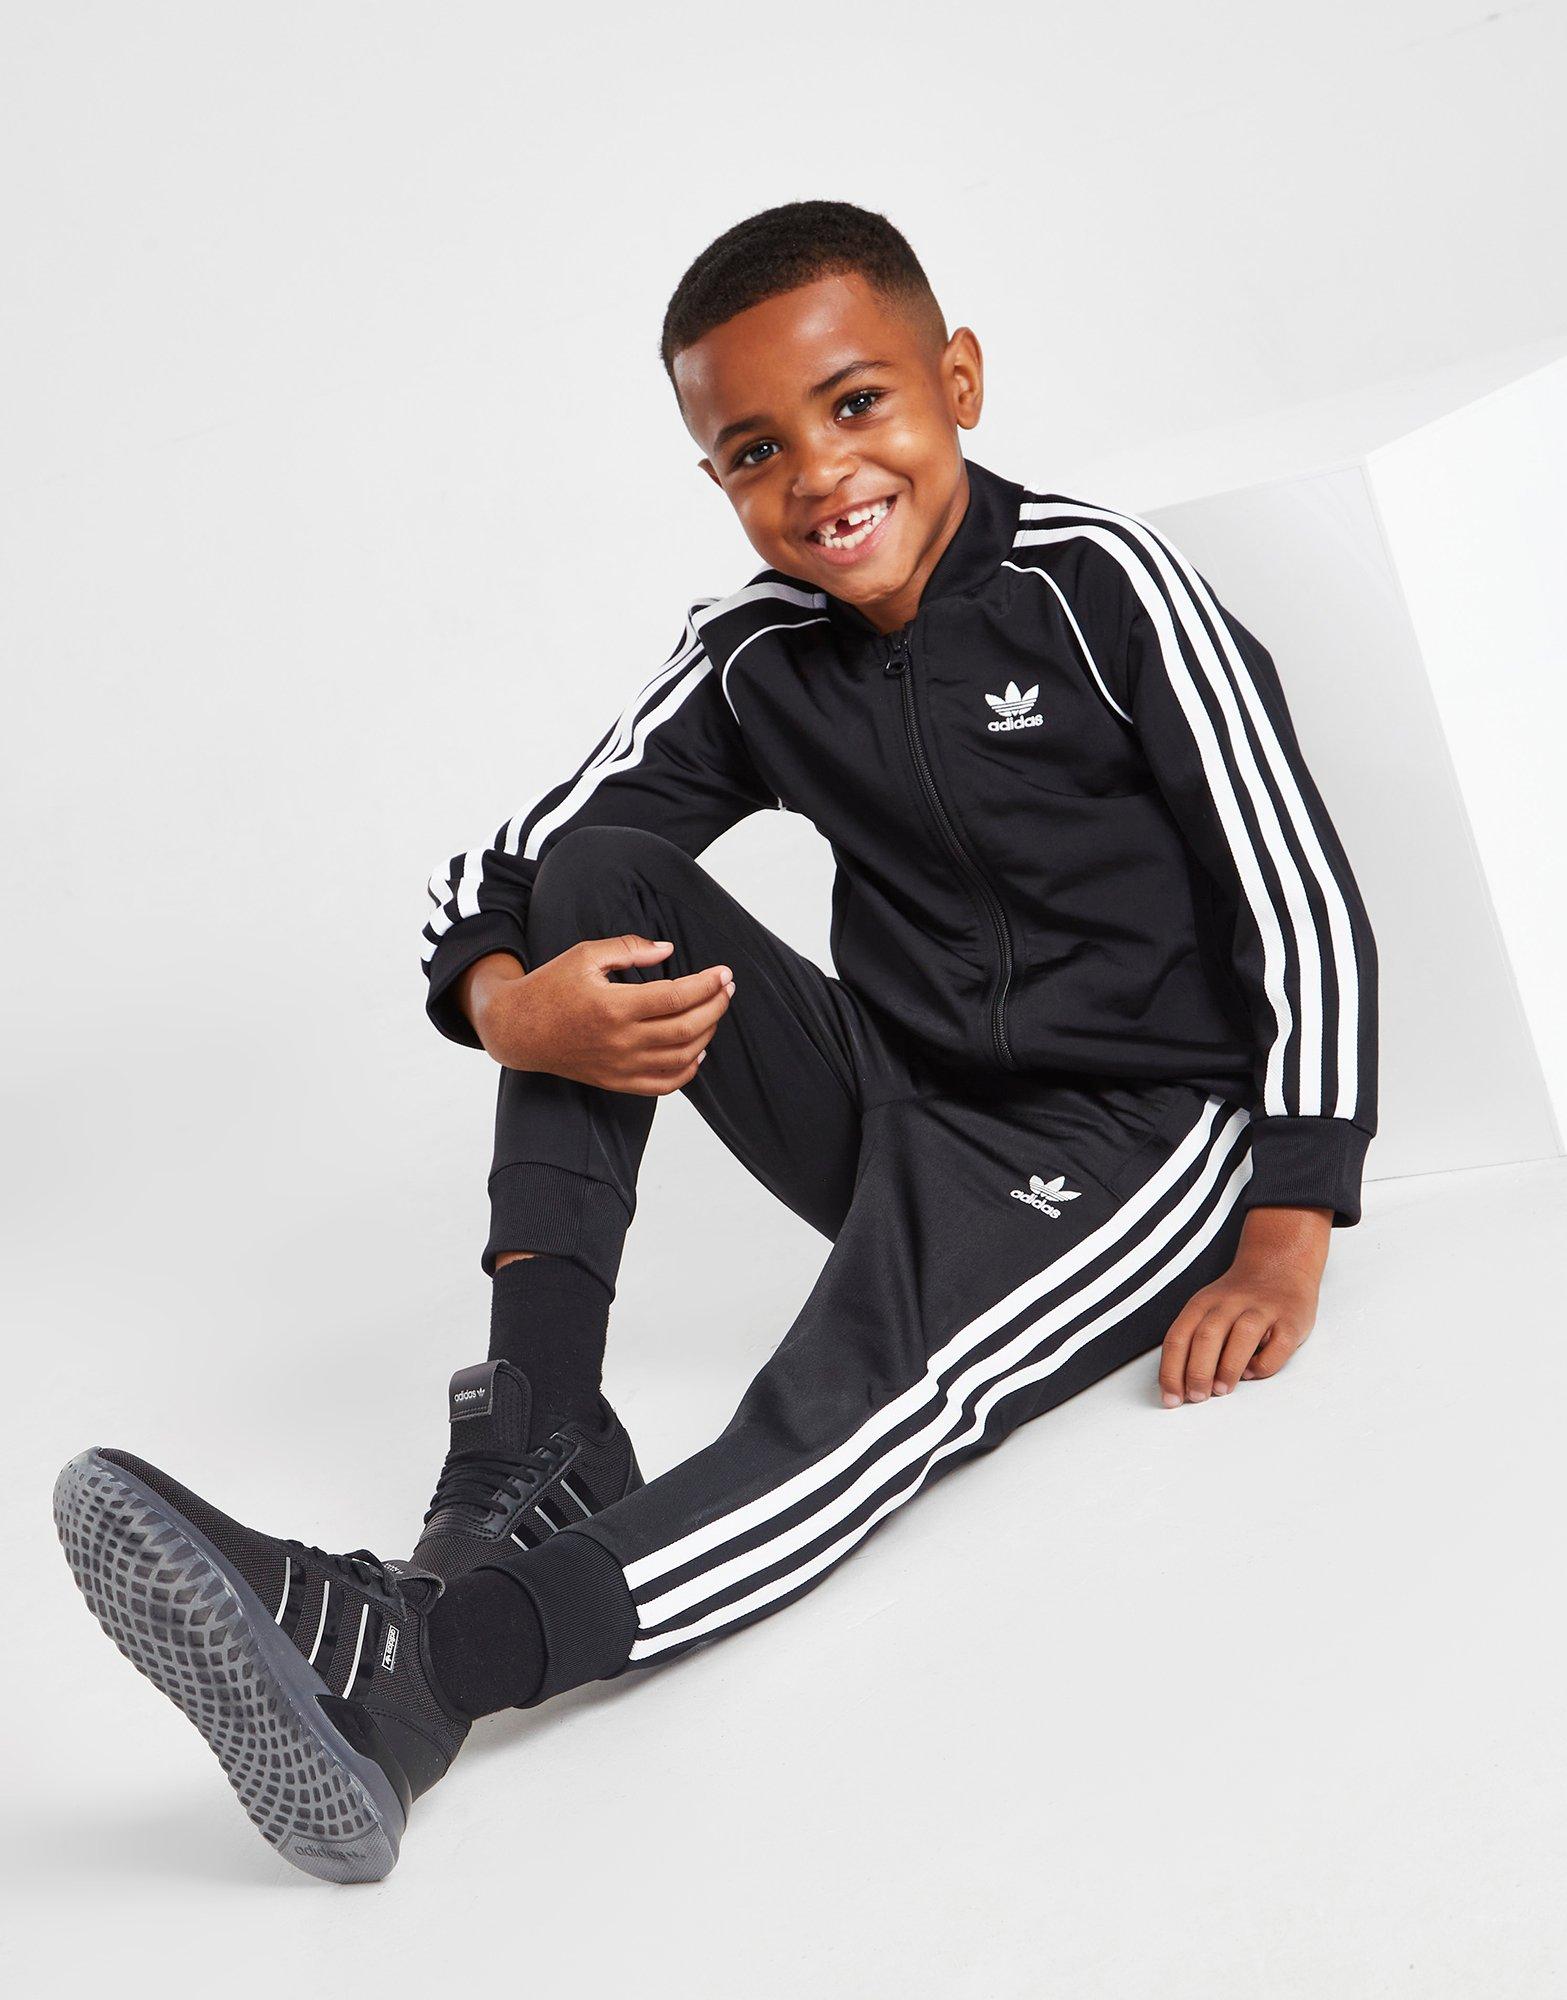 Men's adidas Sweatpants: Hit The Track With Cool adidas Sweats